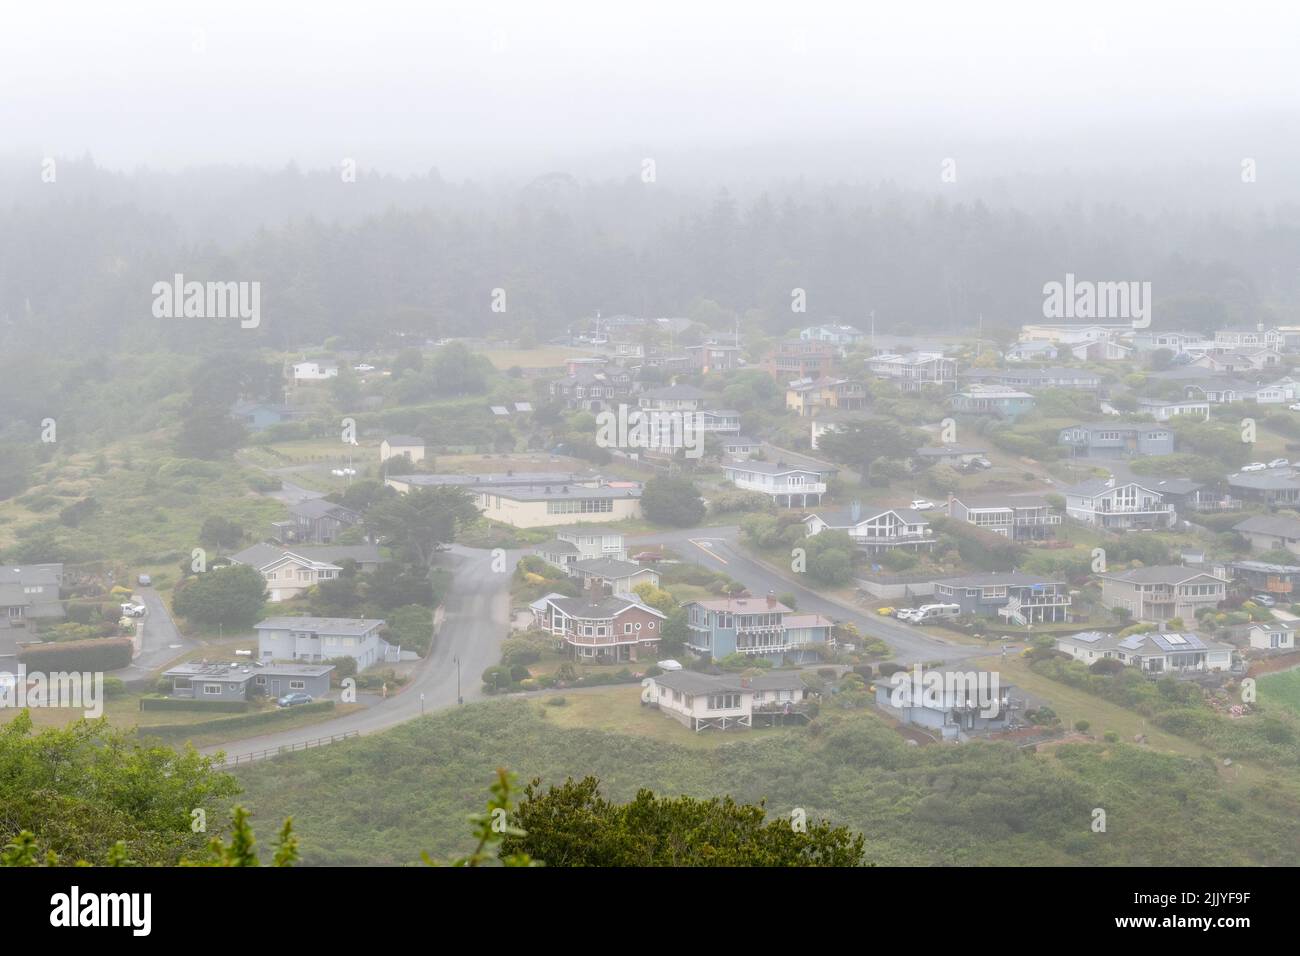 The town of Trinidad, Humboldt County, viewed from above, on a typical foggy day of Coastal Northern California Stock Photo